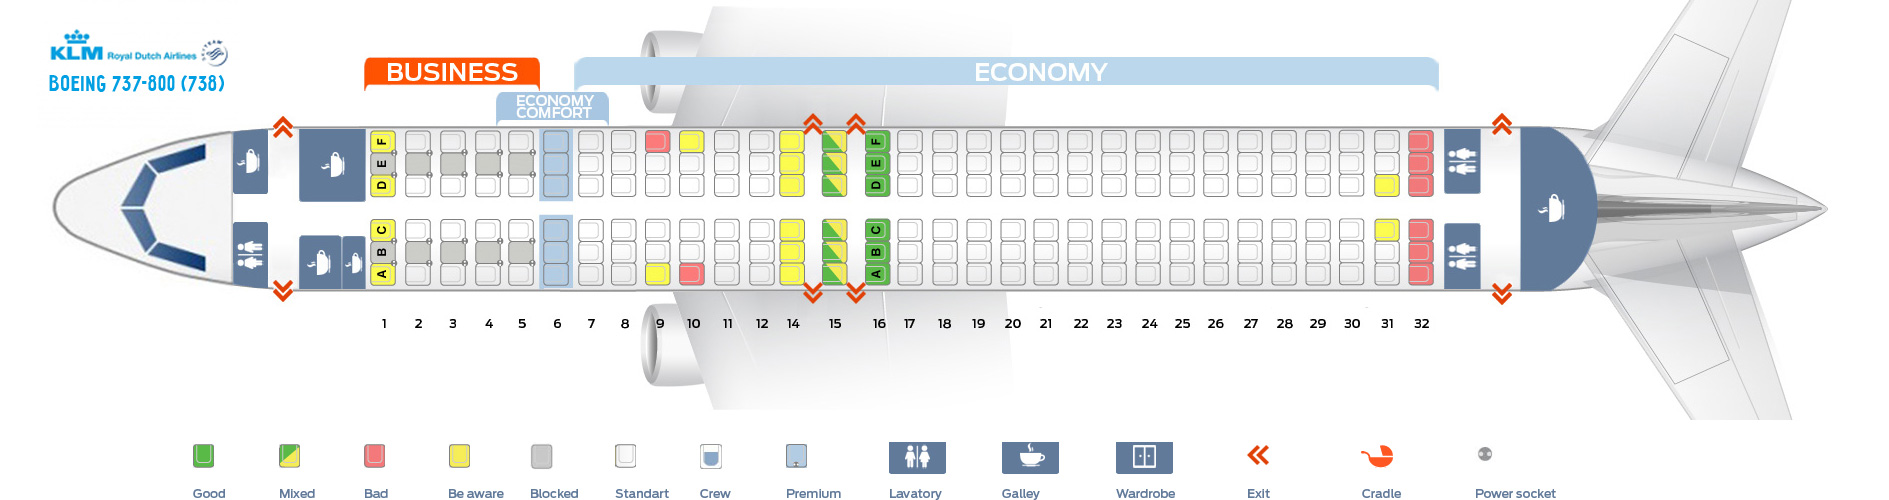 Seat Map Boeing 737 800 Klm Best Seats In The Plane